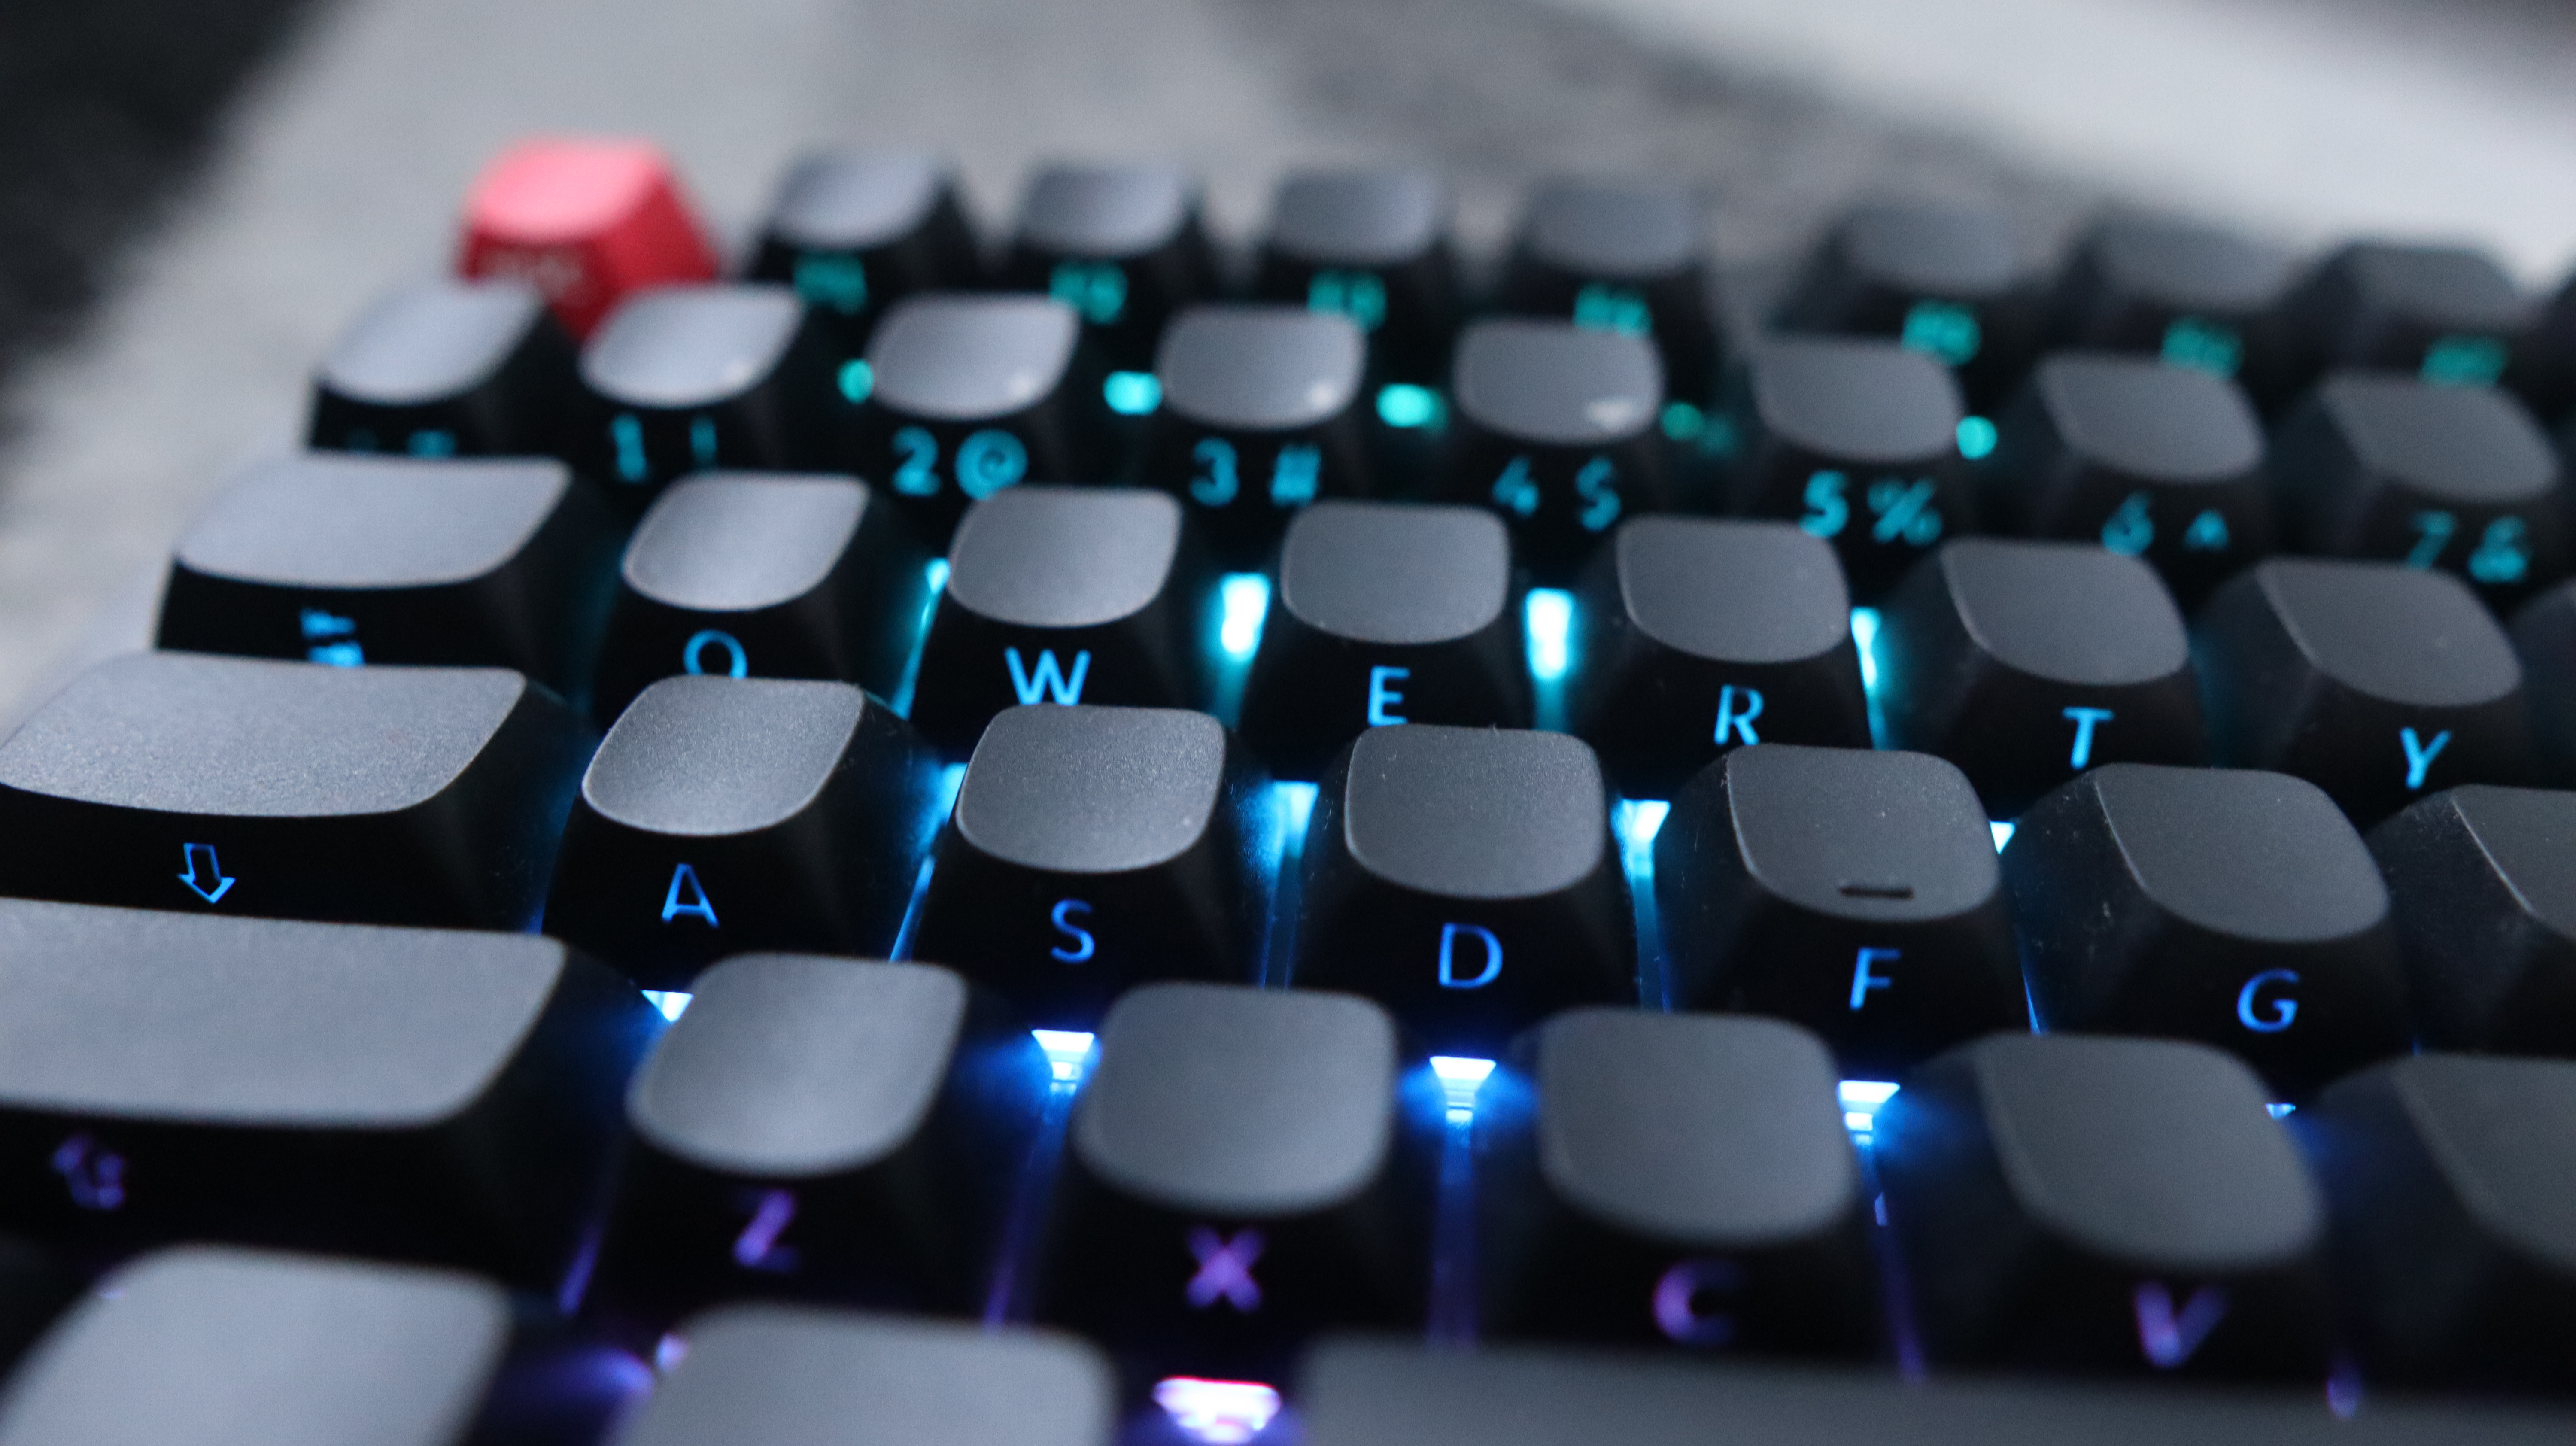 The Keychron Q3 Max gaming keyboard set-up on a desk with the RGB lighting enabled.